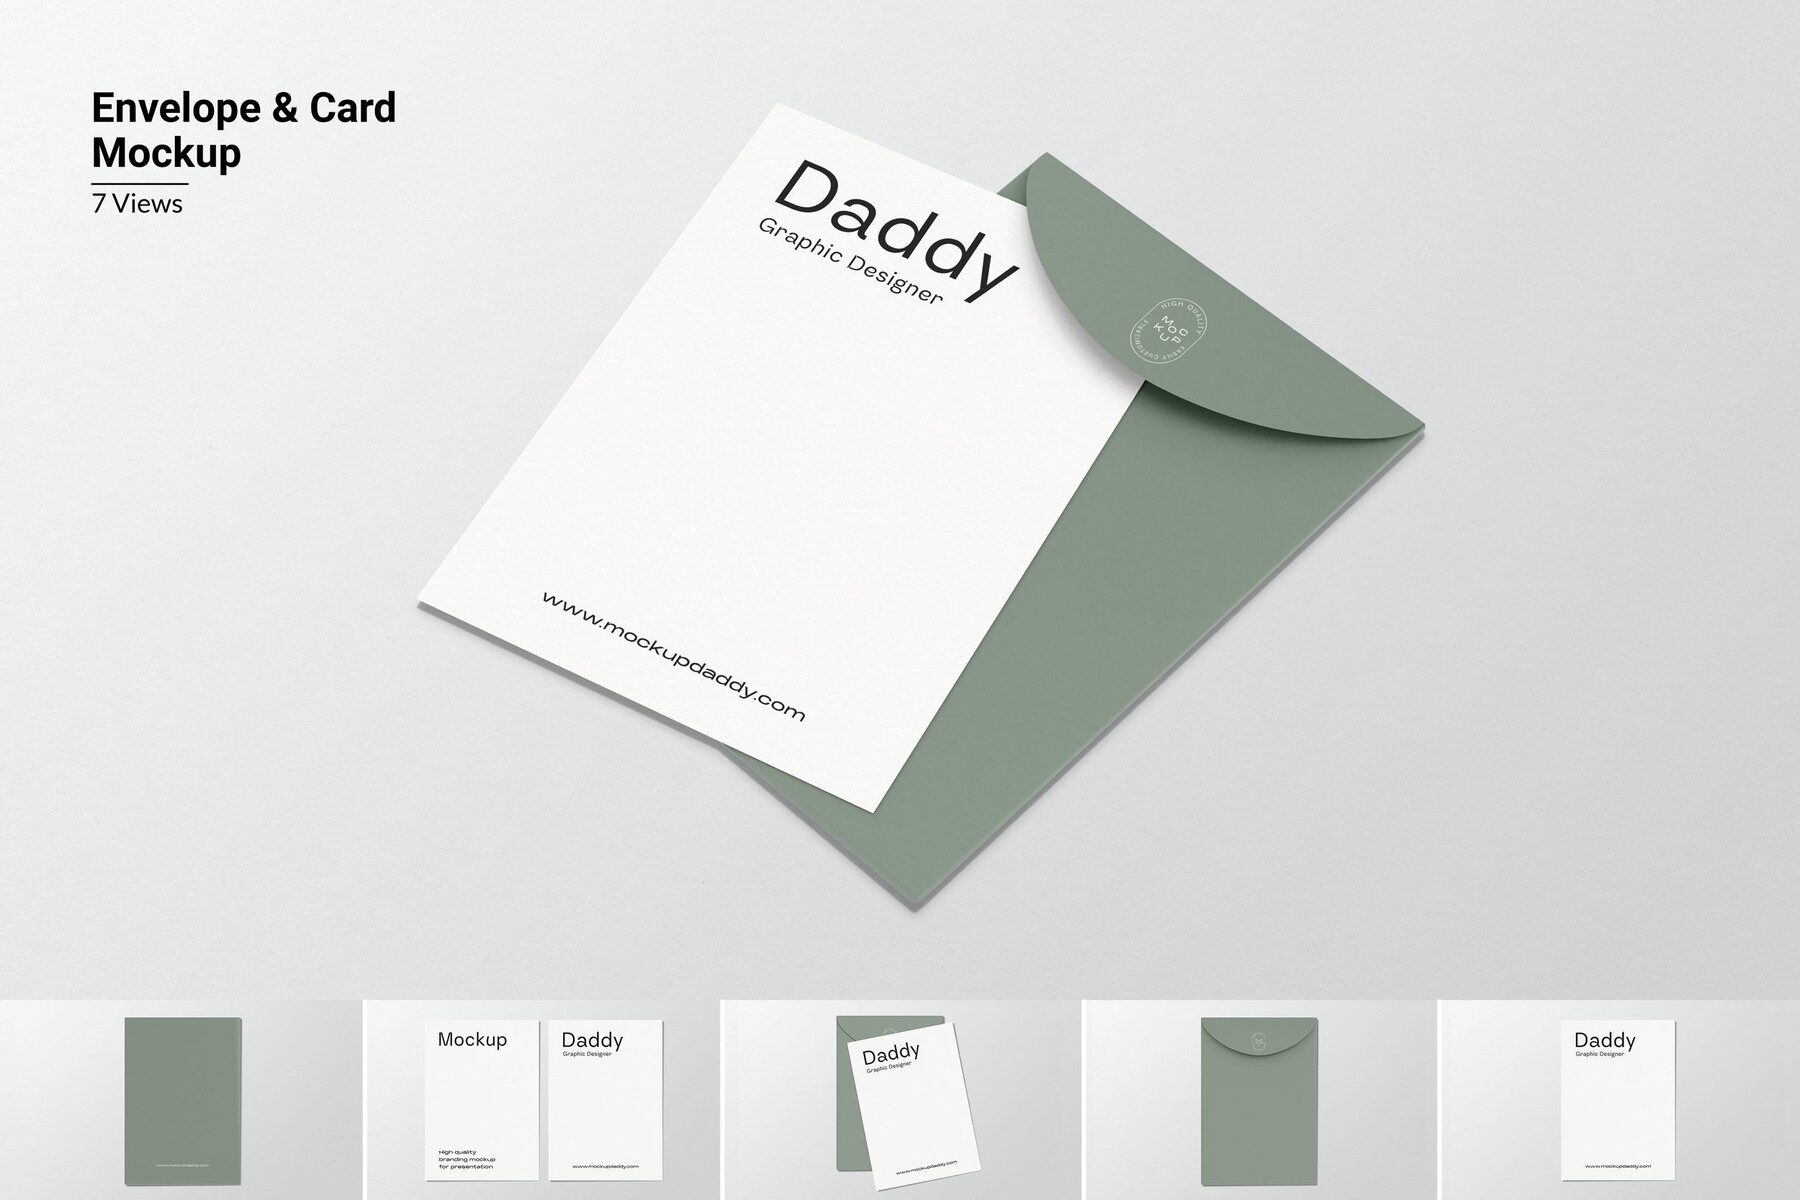 21,239 A4 Envelope Mockup Images, Stock Photos, 3D objects, & Vectors